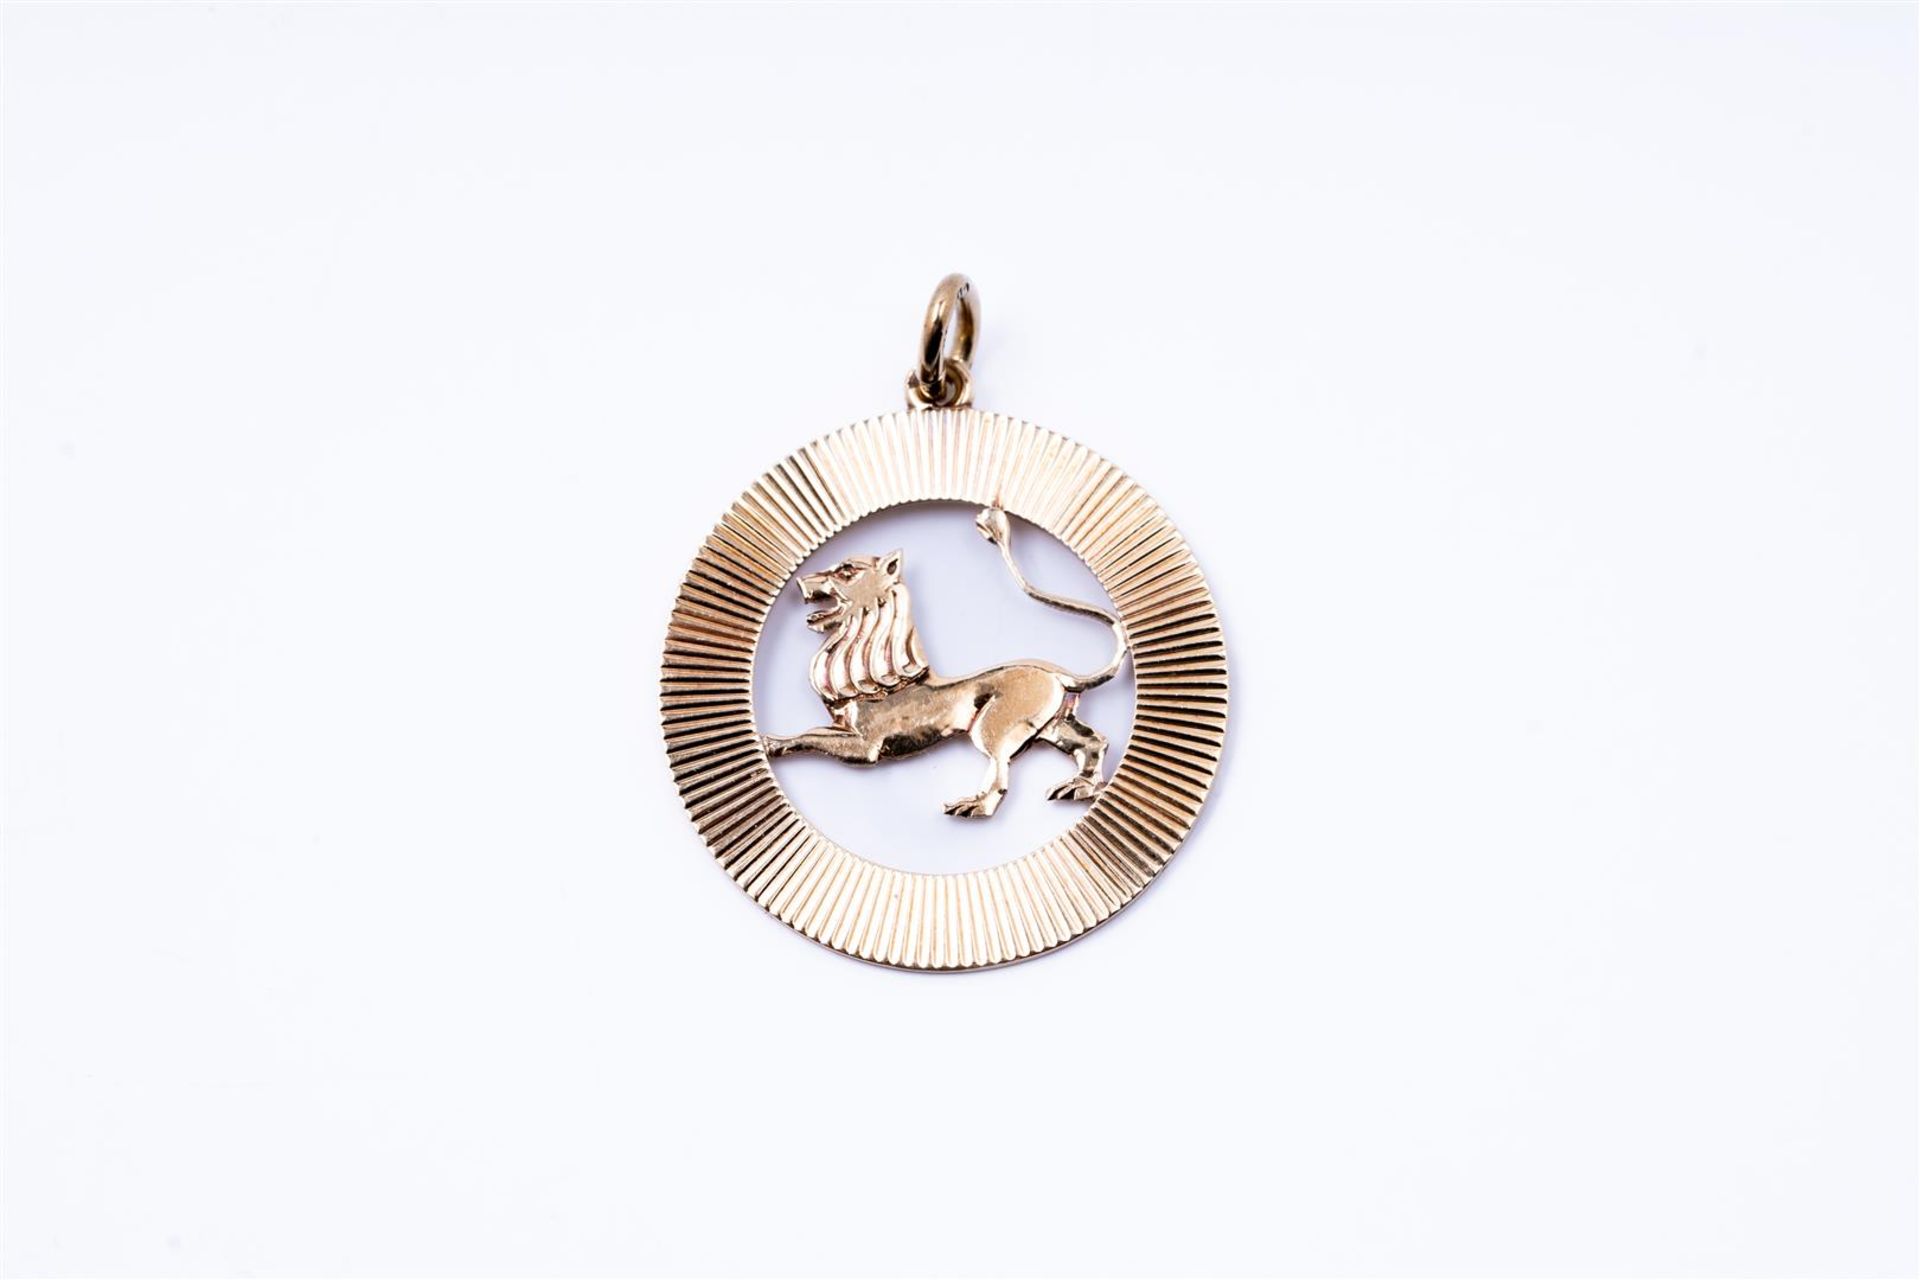 18kt Yellow gold pendant with lion and ribbed edge.
Dimensions: 35.8mm x 27.9mm.
Weight: 5.49 grams.